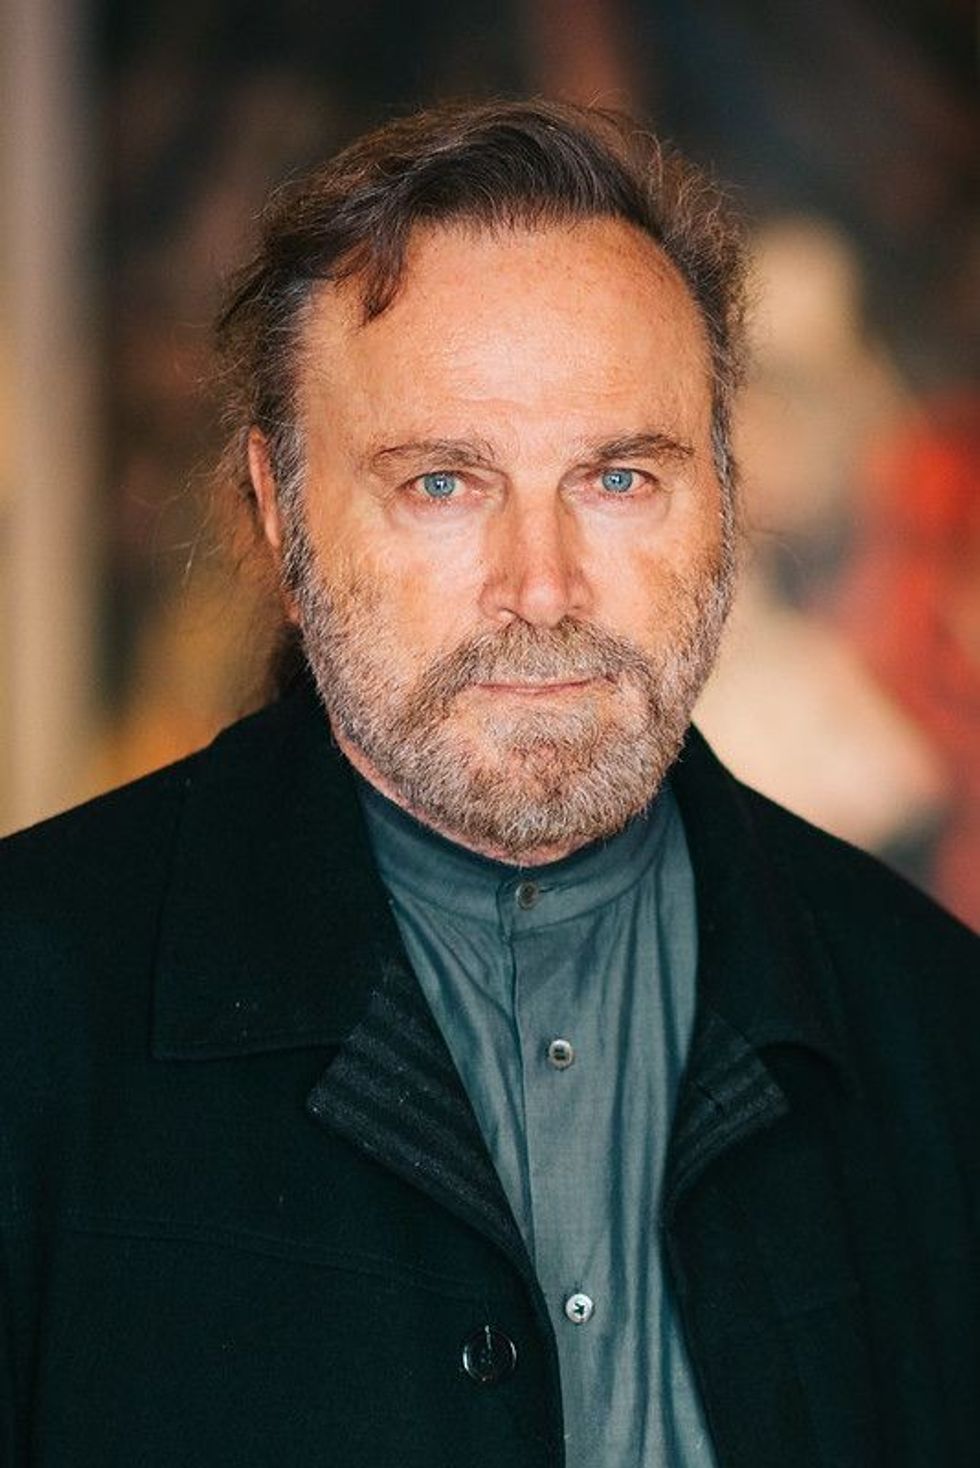 Read Franco Nero facts to know more about the western film and the lead role of this Italian actor.